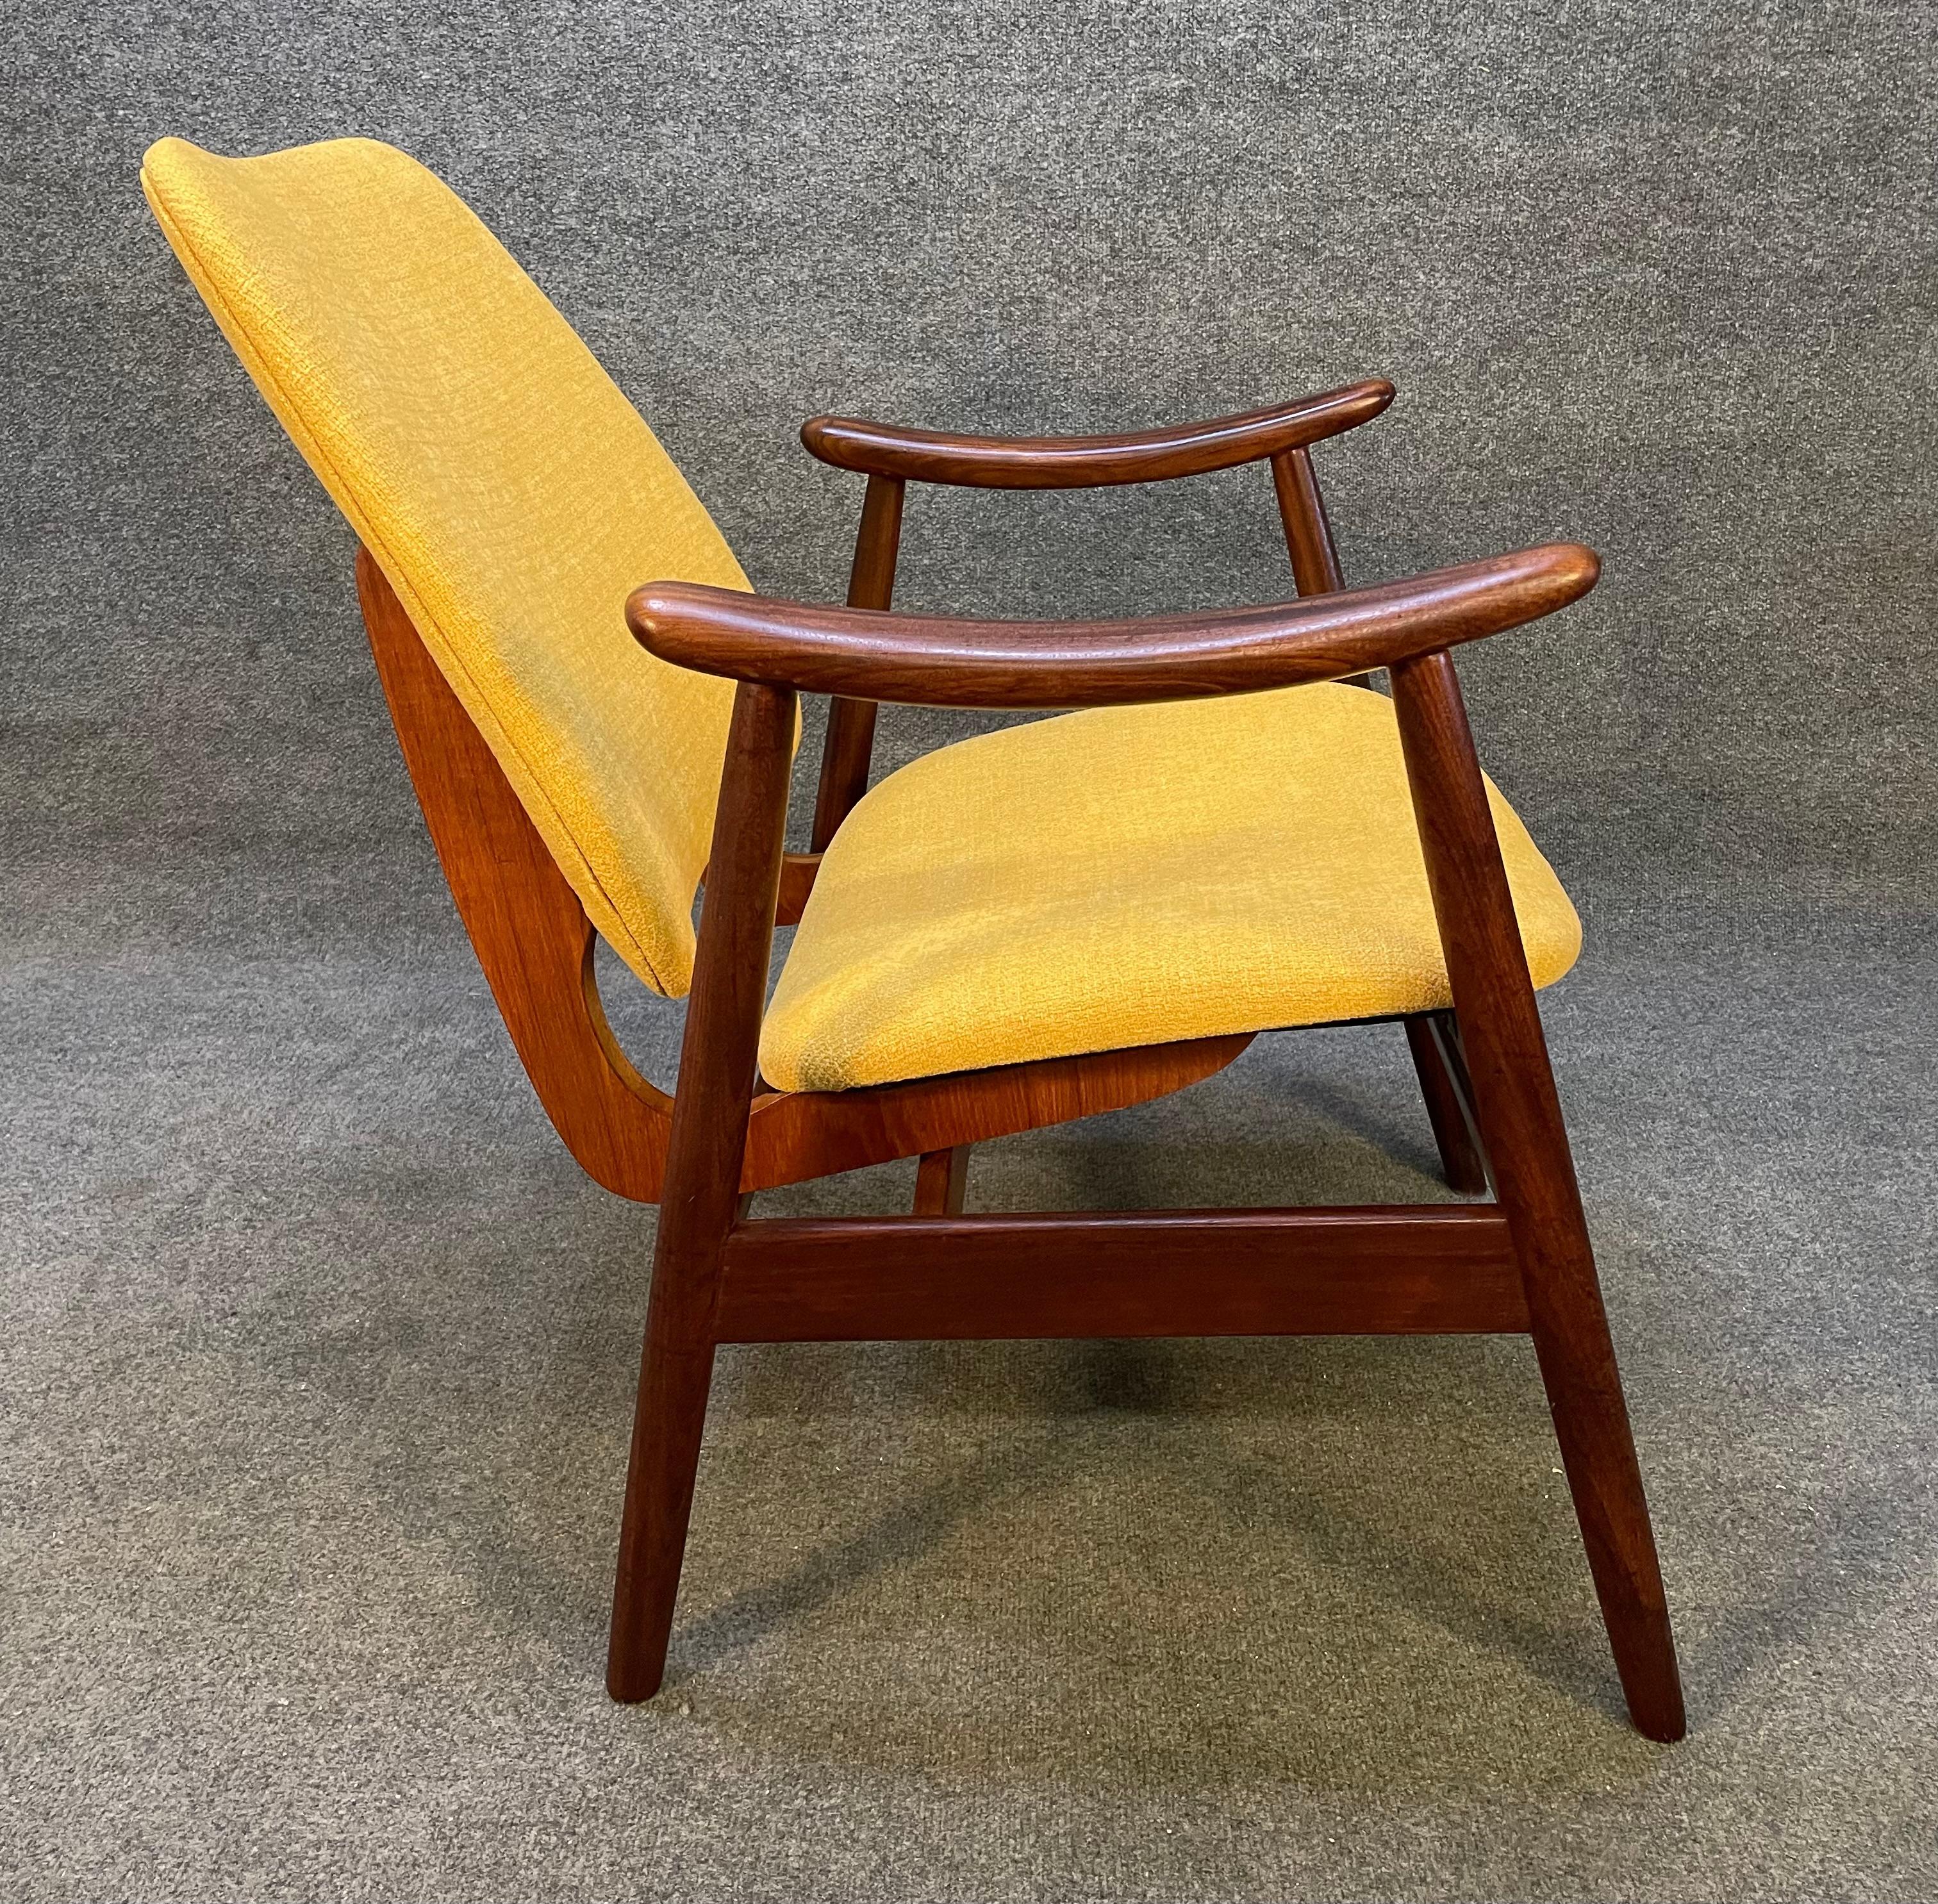 Here is a beautiful 1960's scandinavian modern easy chair in afromasia teak recently imported from Norway to California before its refinishing.
This comfortable chair features a brand new yellow textured upholstery contrasting with an organically